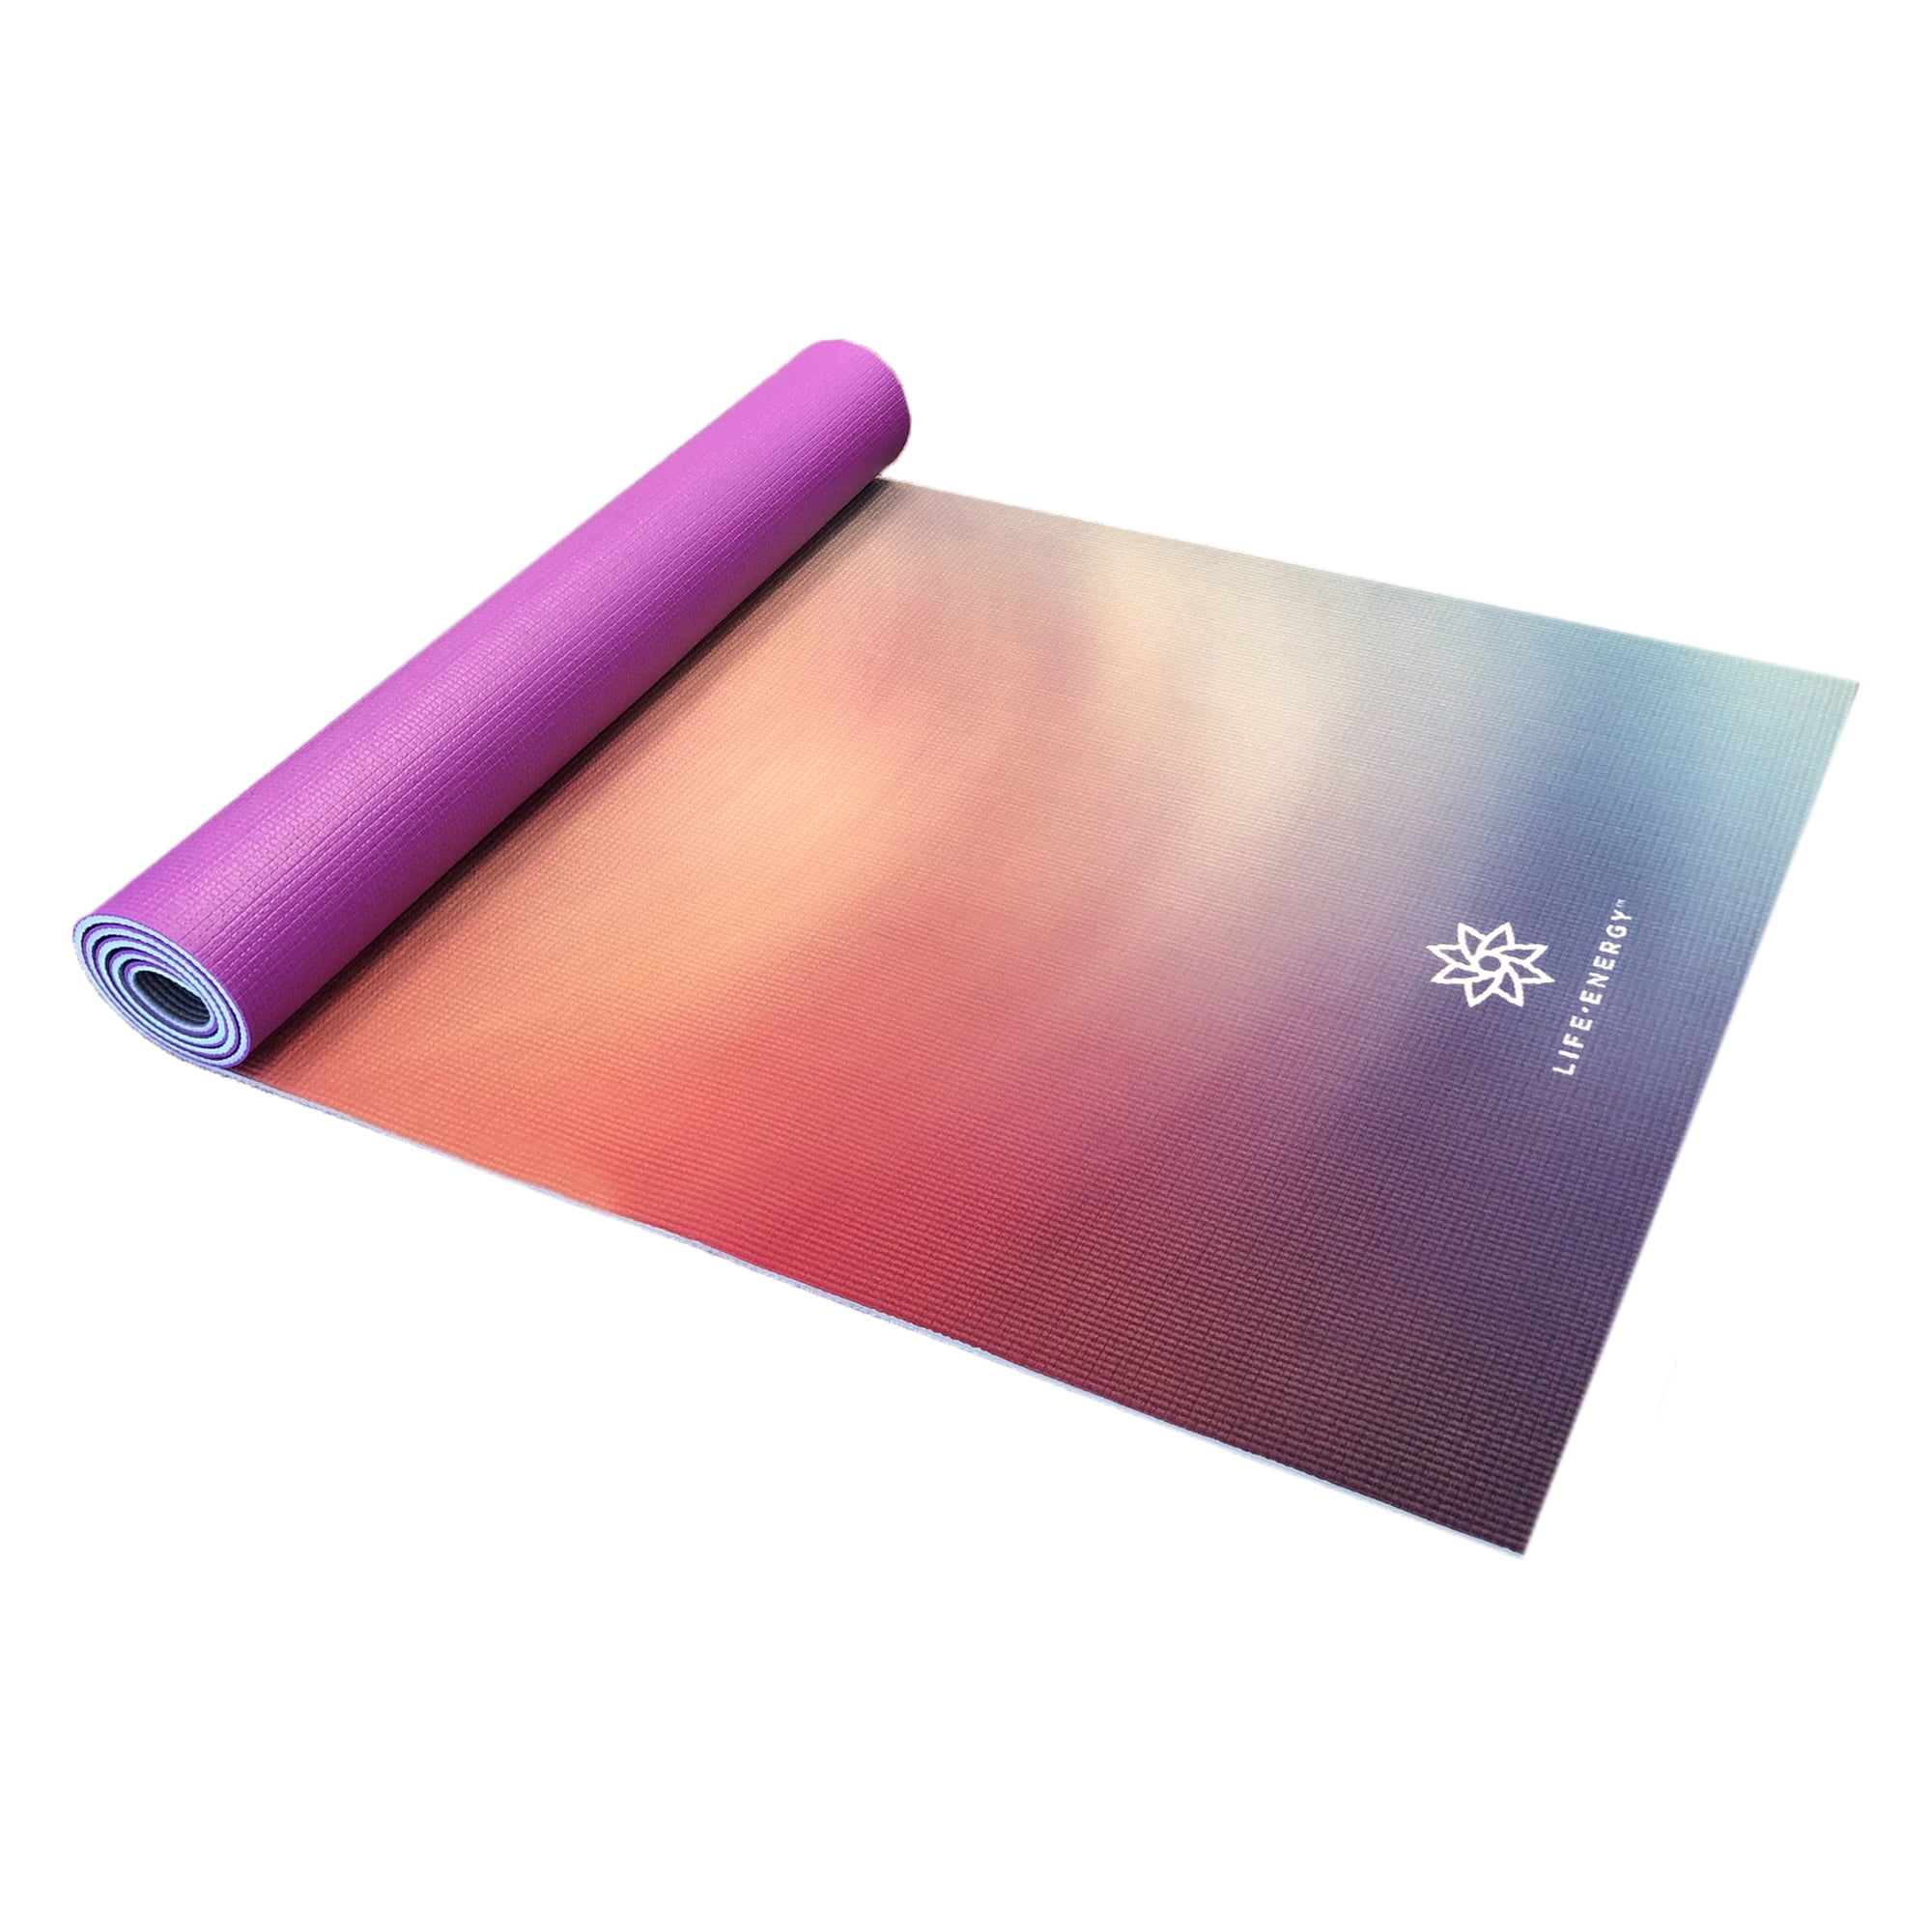 183x59x0.6cm ATIVAFIT Non Slip TPE Yoga Mat Eco Friendly Exercise & Workout Mat with Carrying Strap Types of Yoga Extra Large Exercise 